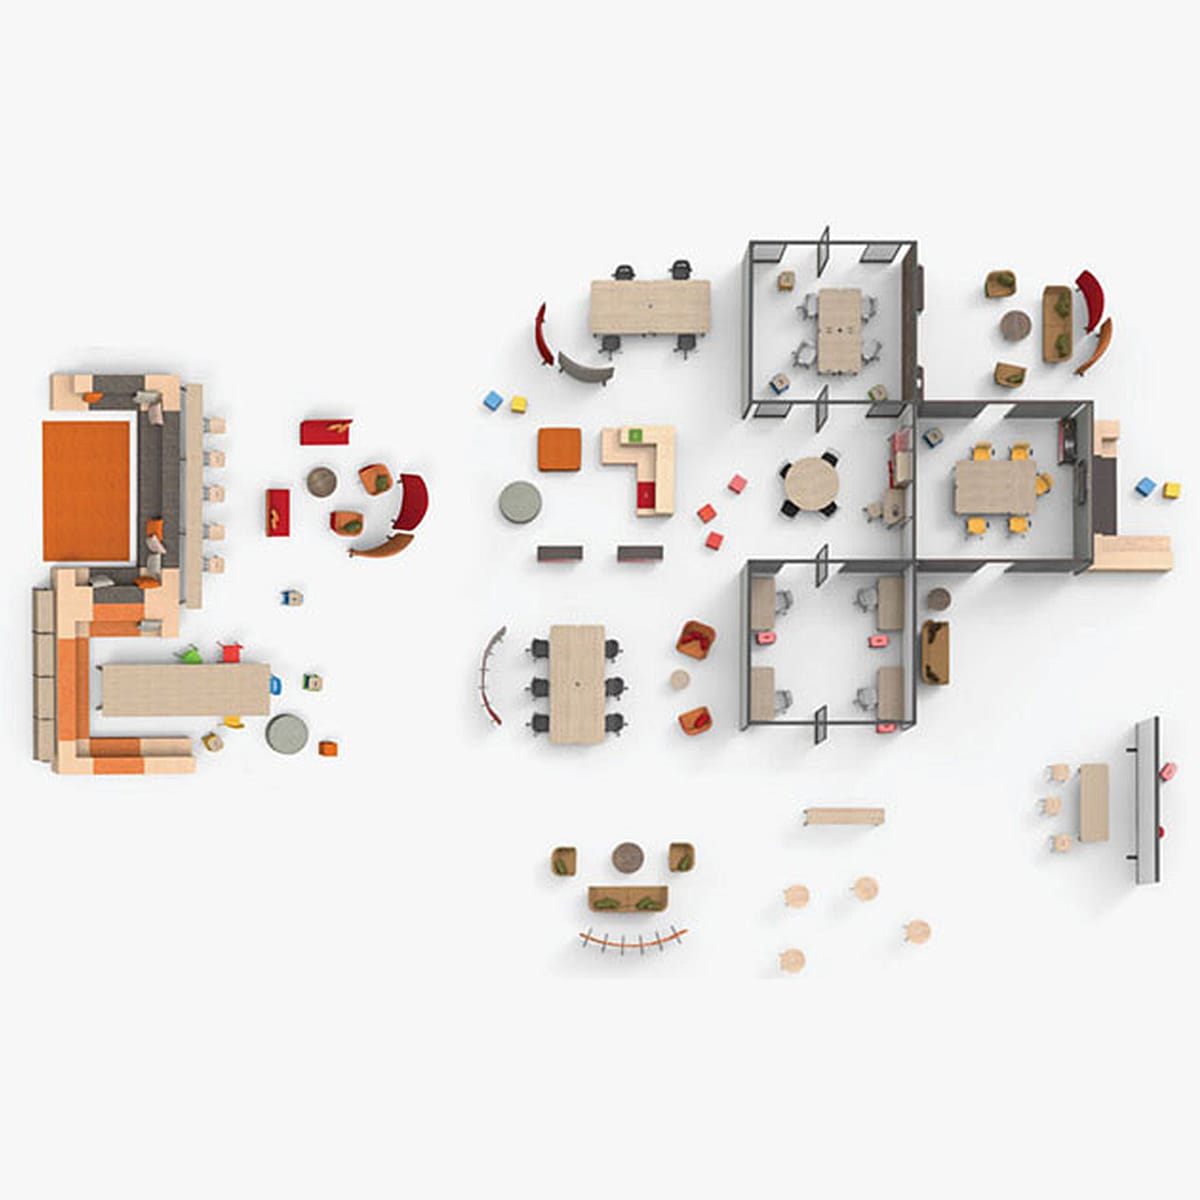 Planning with Knoll, Courtesy of Knoll, Inc.